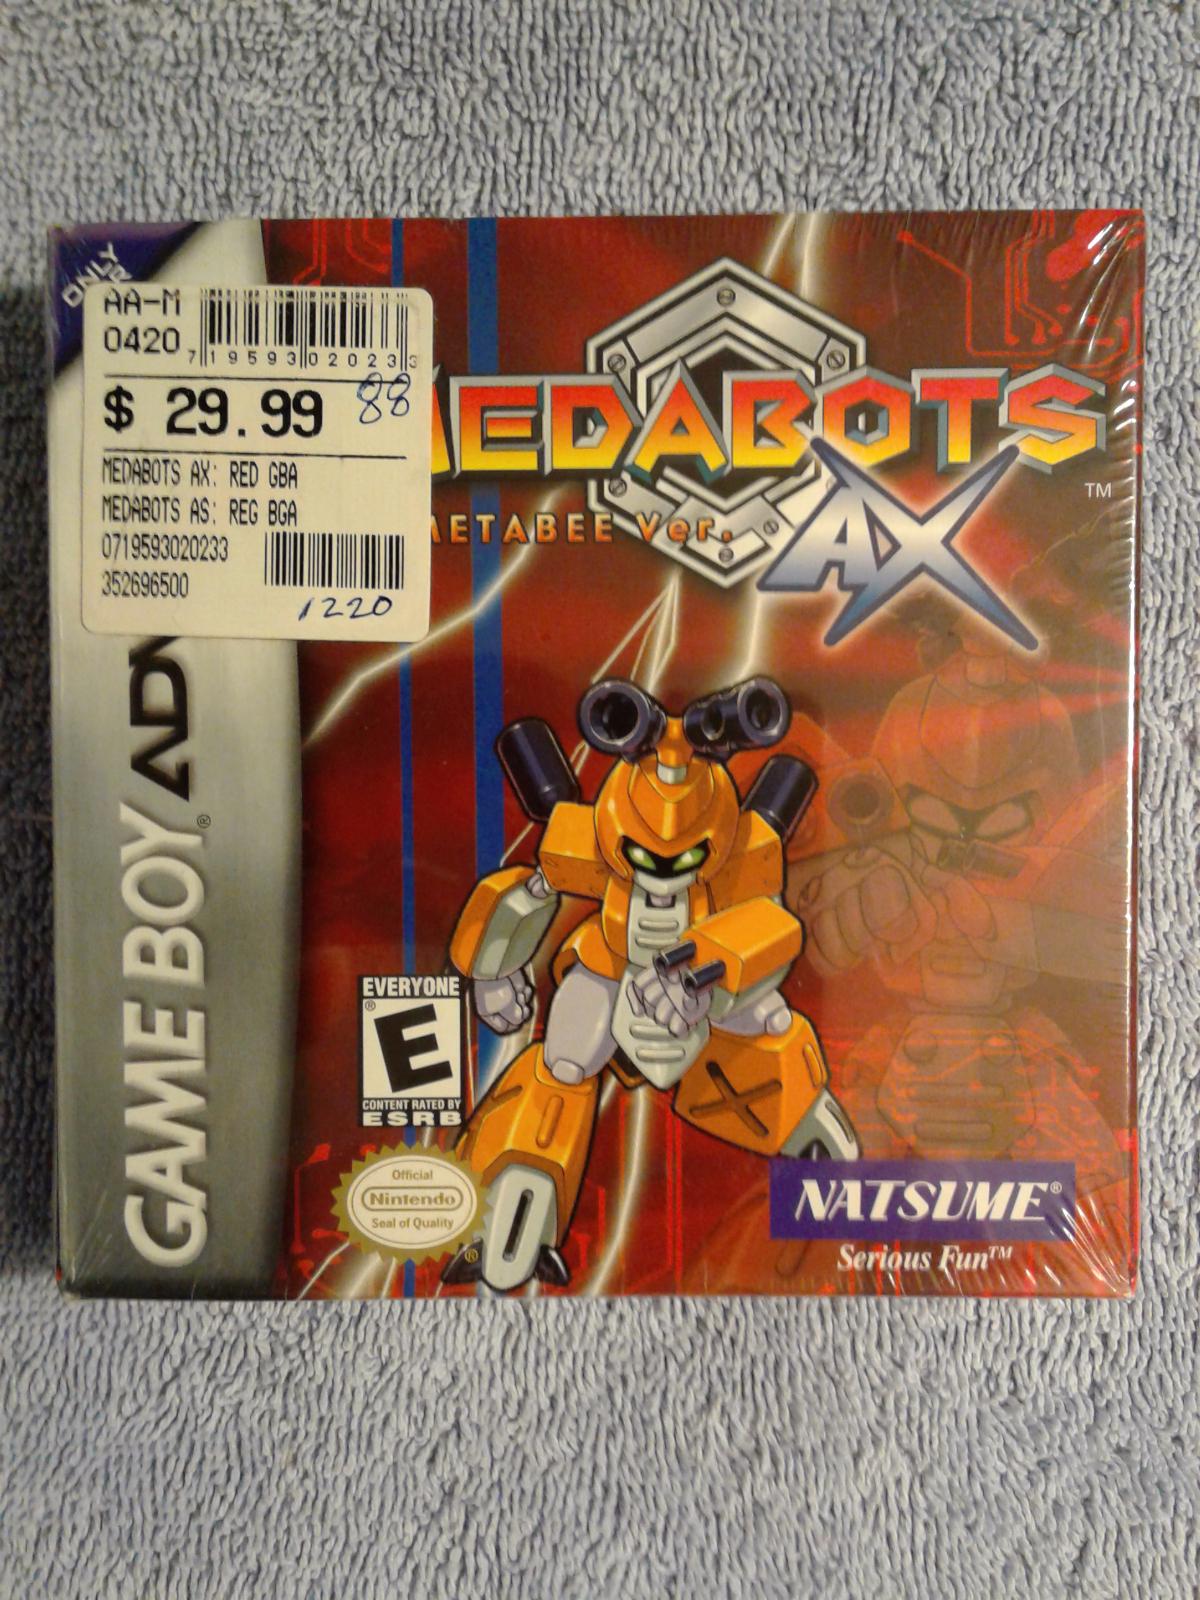 Medabots AX: Metabee | New Item, Box, and Manual | GameBoy Advance